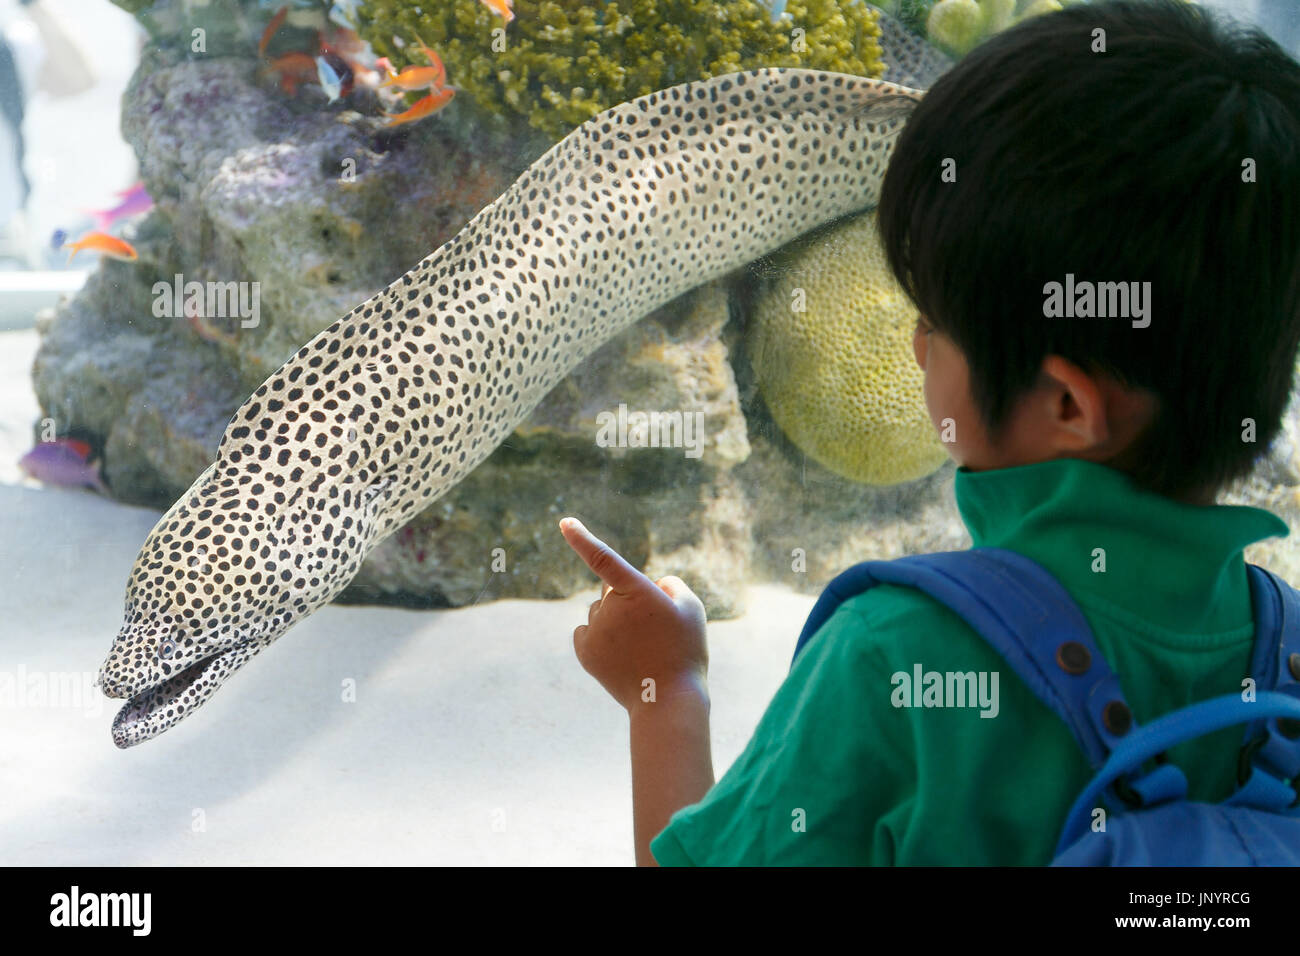 Tokyo, Japan. 31st July, 2017. A boy looks at a Black-spotted moray from Okinawa swimming in a huge fish tank set up in Yurakucho on July 31, 2017, Tokyo, Japan. ''Sony Aquariums'' are set up in front of Yurakucho station and at Sony Showroom/Sony Store, showcasing different marine animals from the Okinawa Churaumi Aquarium including Napoleon wrasse and Black-spotted moray. Credit: Rodrigo Reyes Marin/AFLO/Alamy Live News Stock Photo